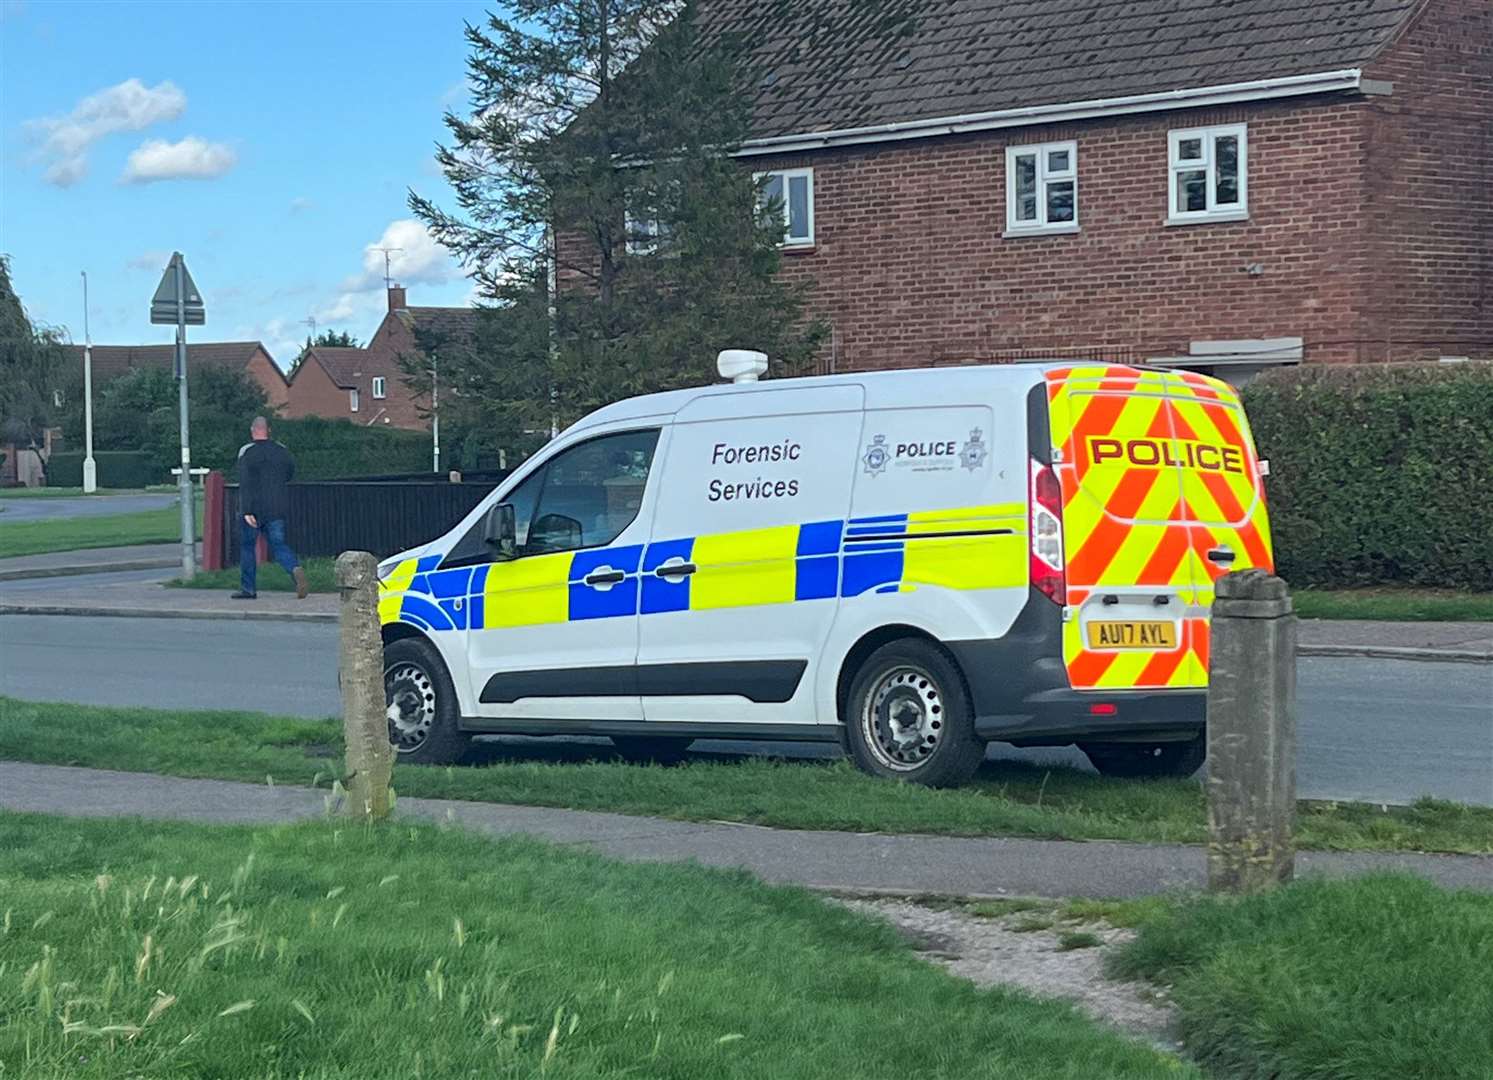 A police forensics van was parked up close to The Beacon church